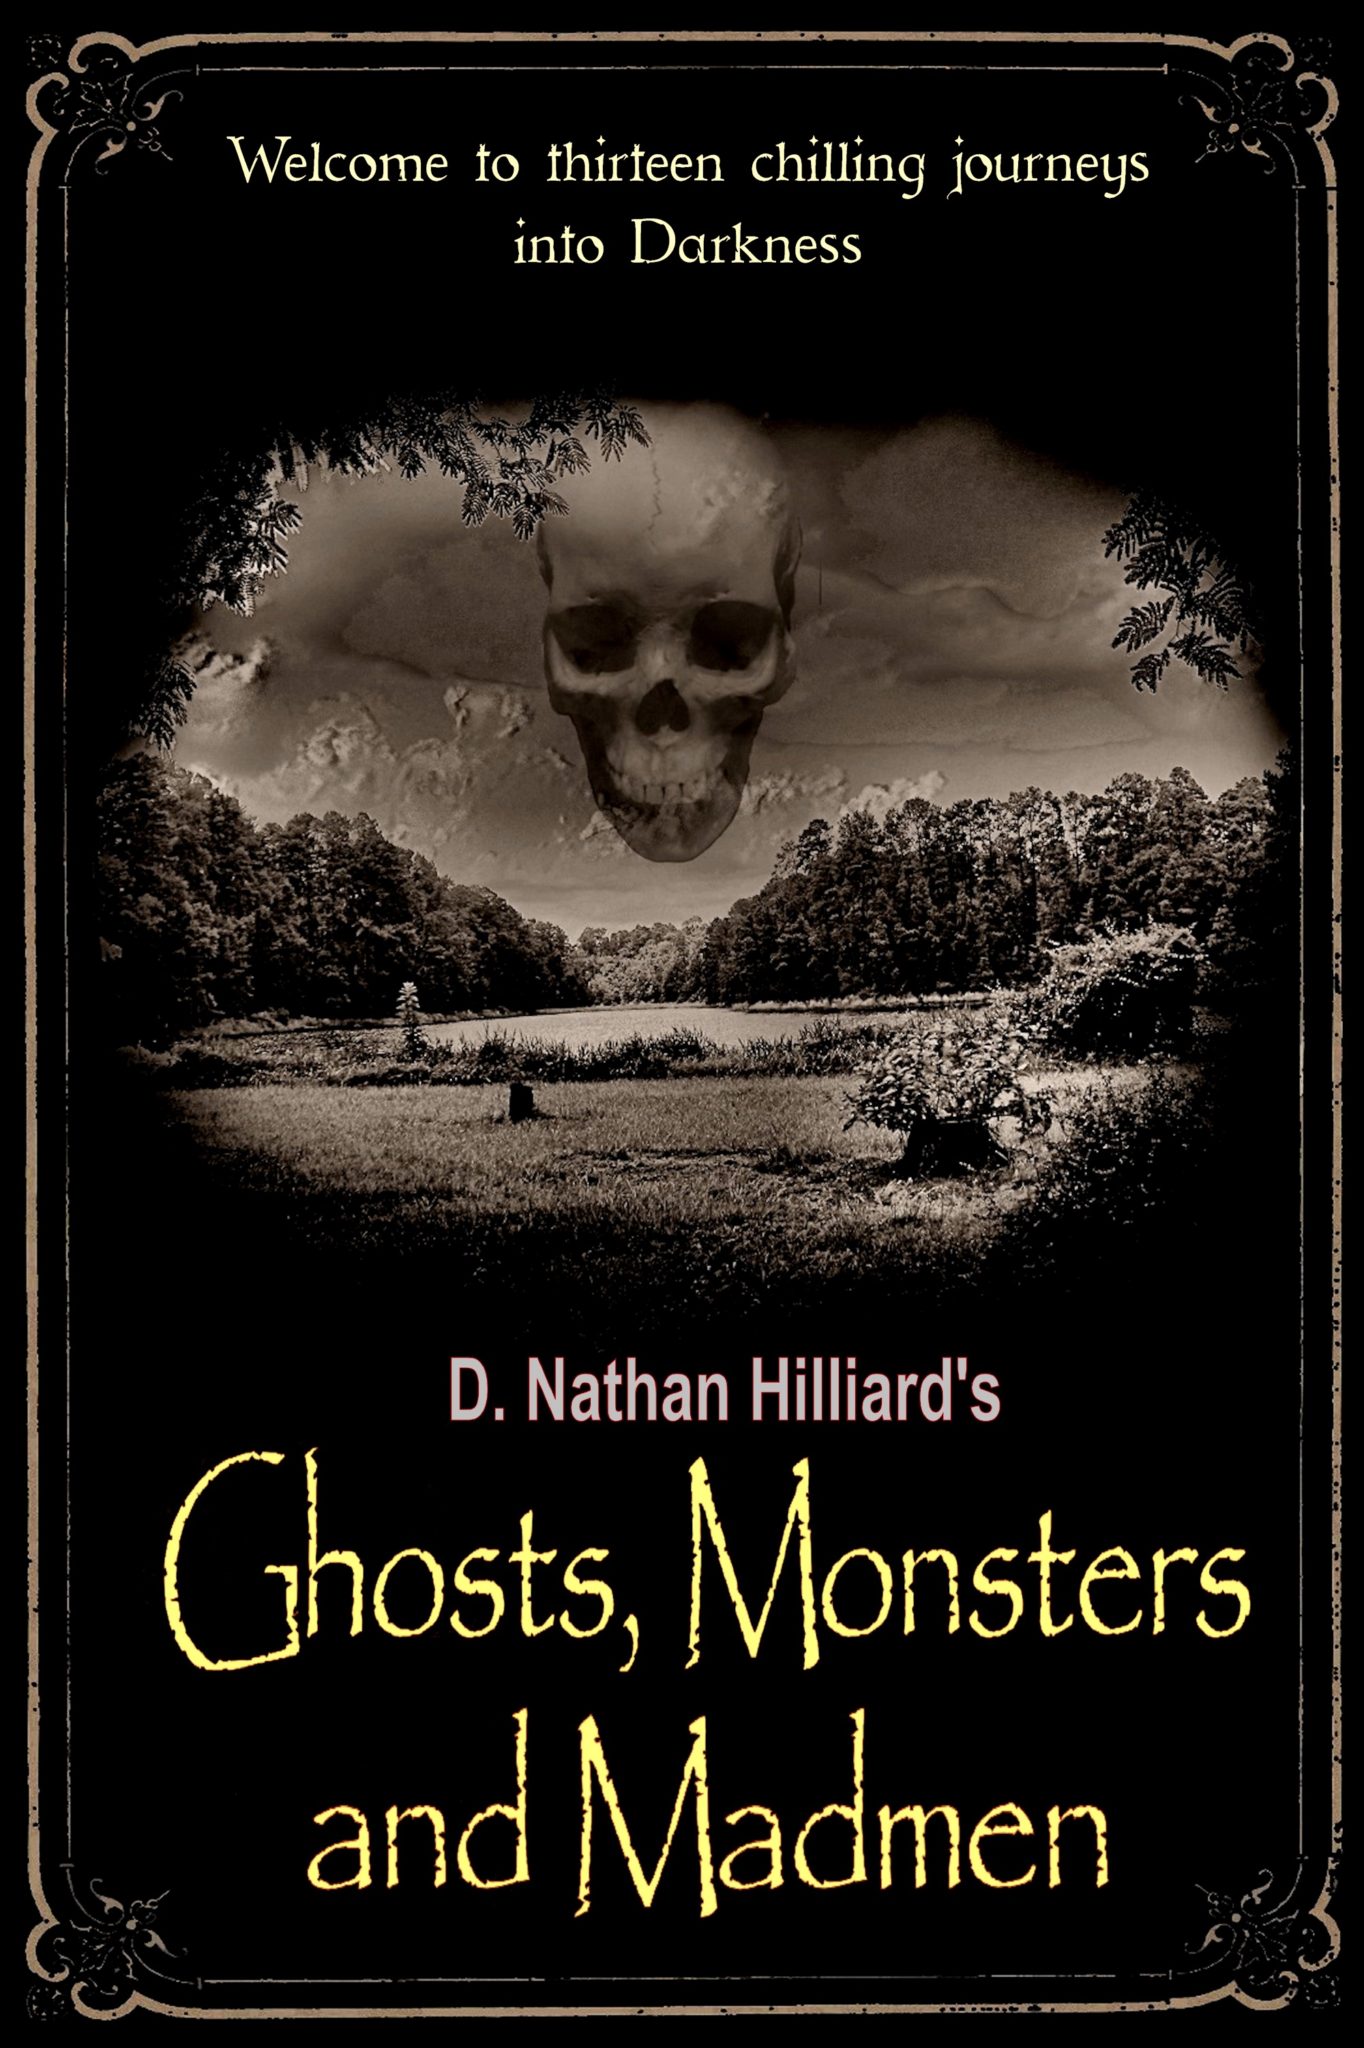 FREE: Ghosts. Monsters and Madmen by D. Nathan Hilliard